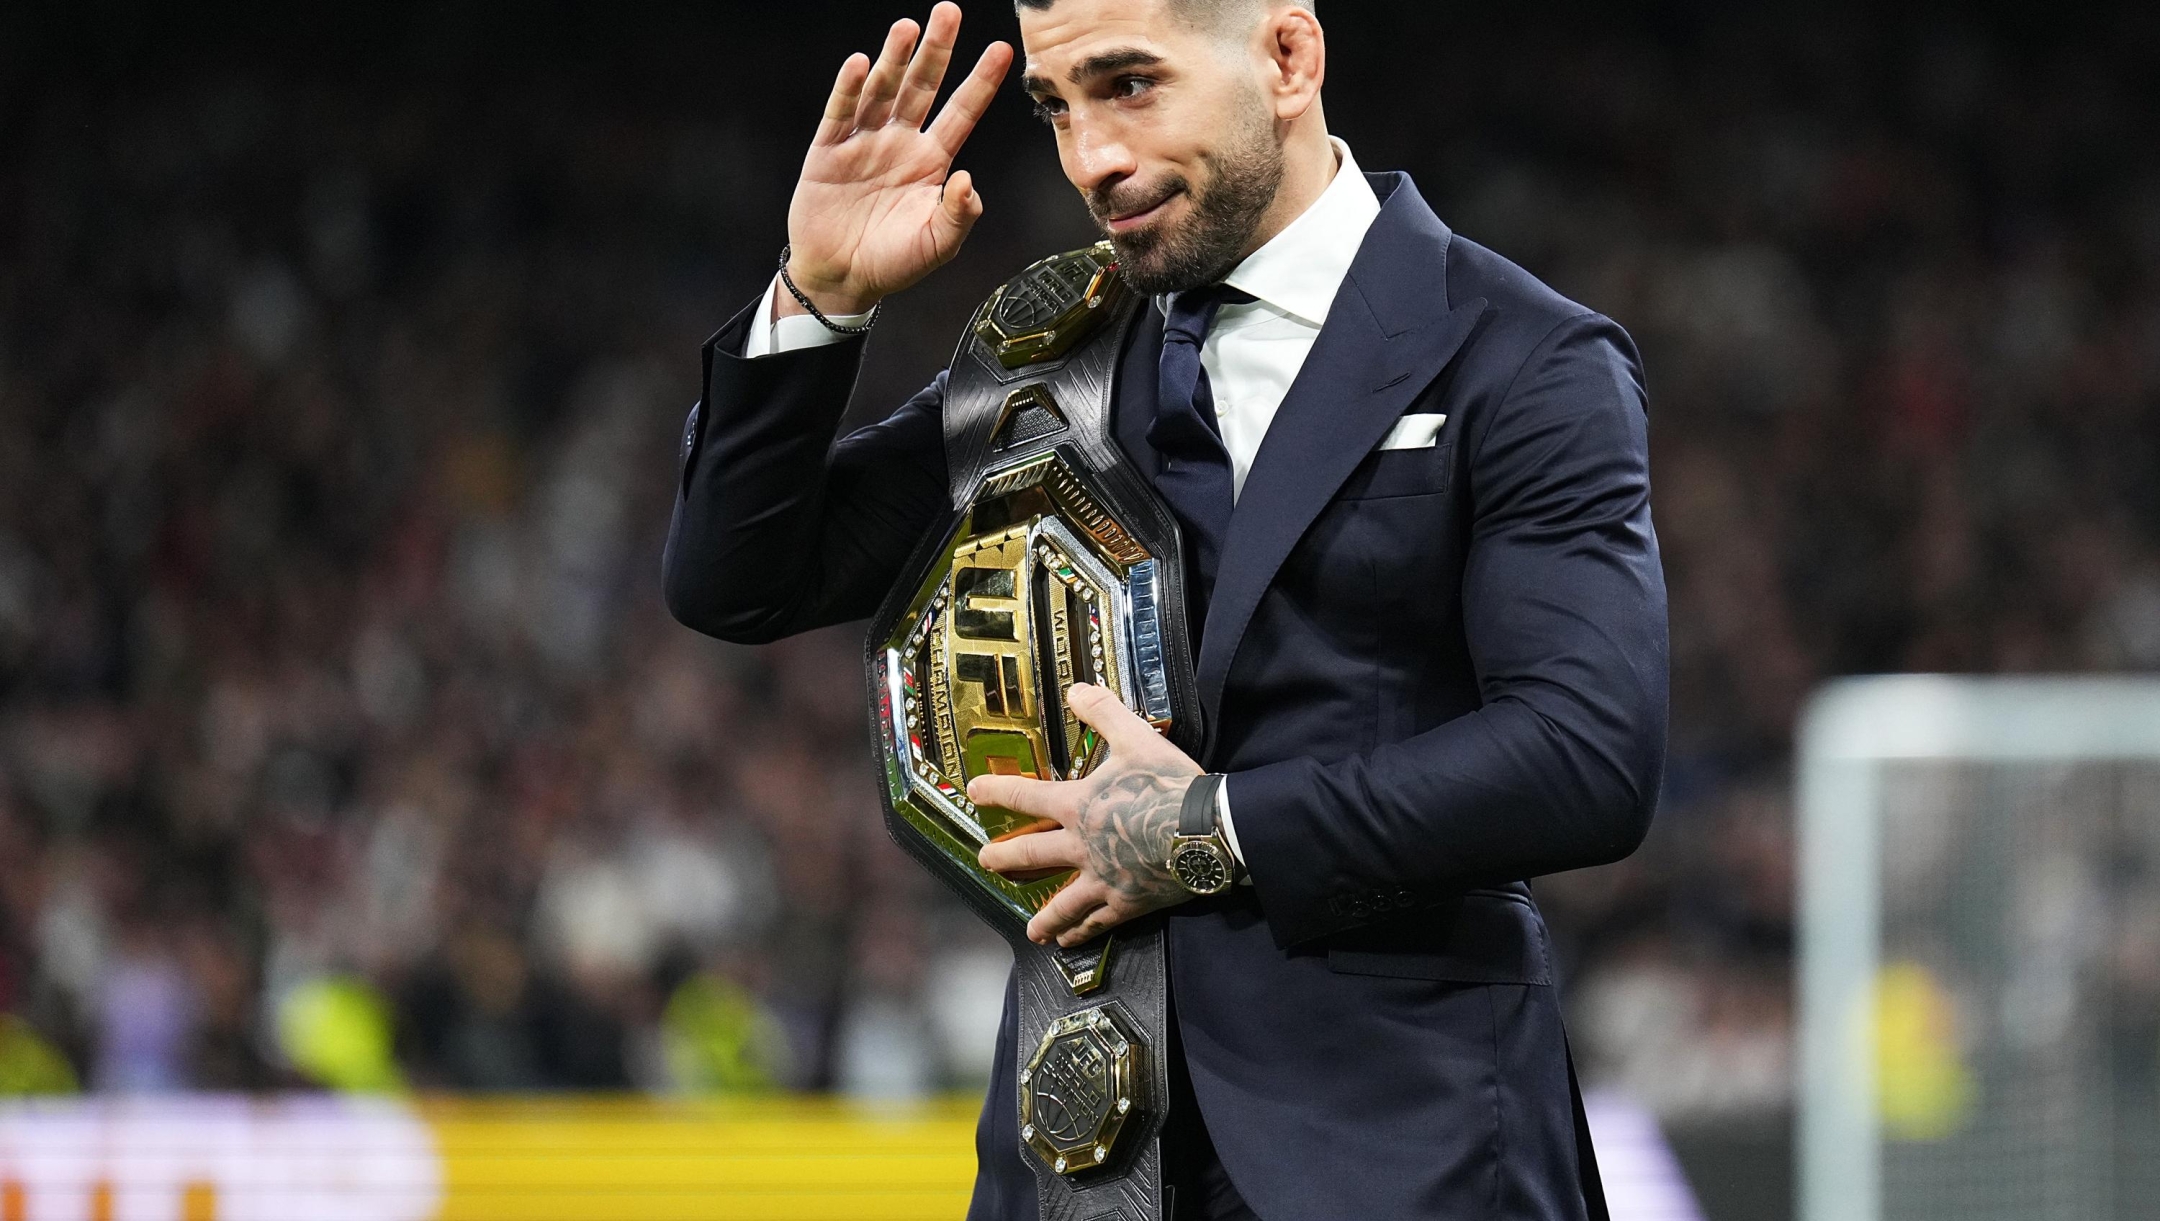 MADRID, SPAIN - FEBRUARY 25: Ilia Topuria, UFC Featherweight Champion, is seen with his belt on the pitch prior to the LaLiga EA Sports match between Real Madrid CF and Sevilla FC at Estadio Santiago Bernabeu on February 25, 2024 in Madrid, Spain. (Photo by Angel Martinez/Getty Images)